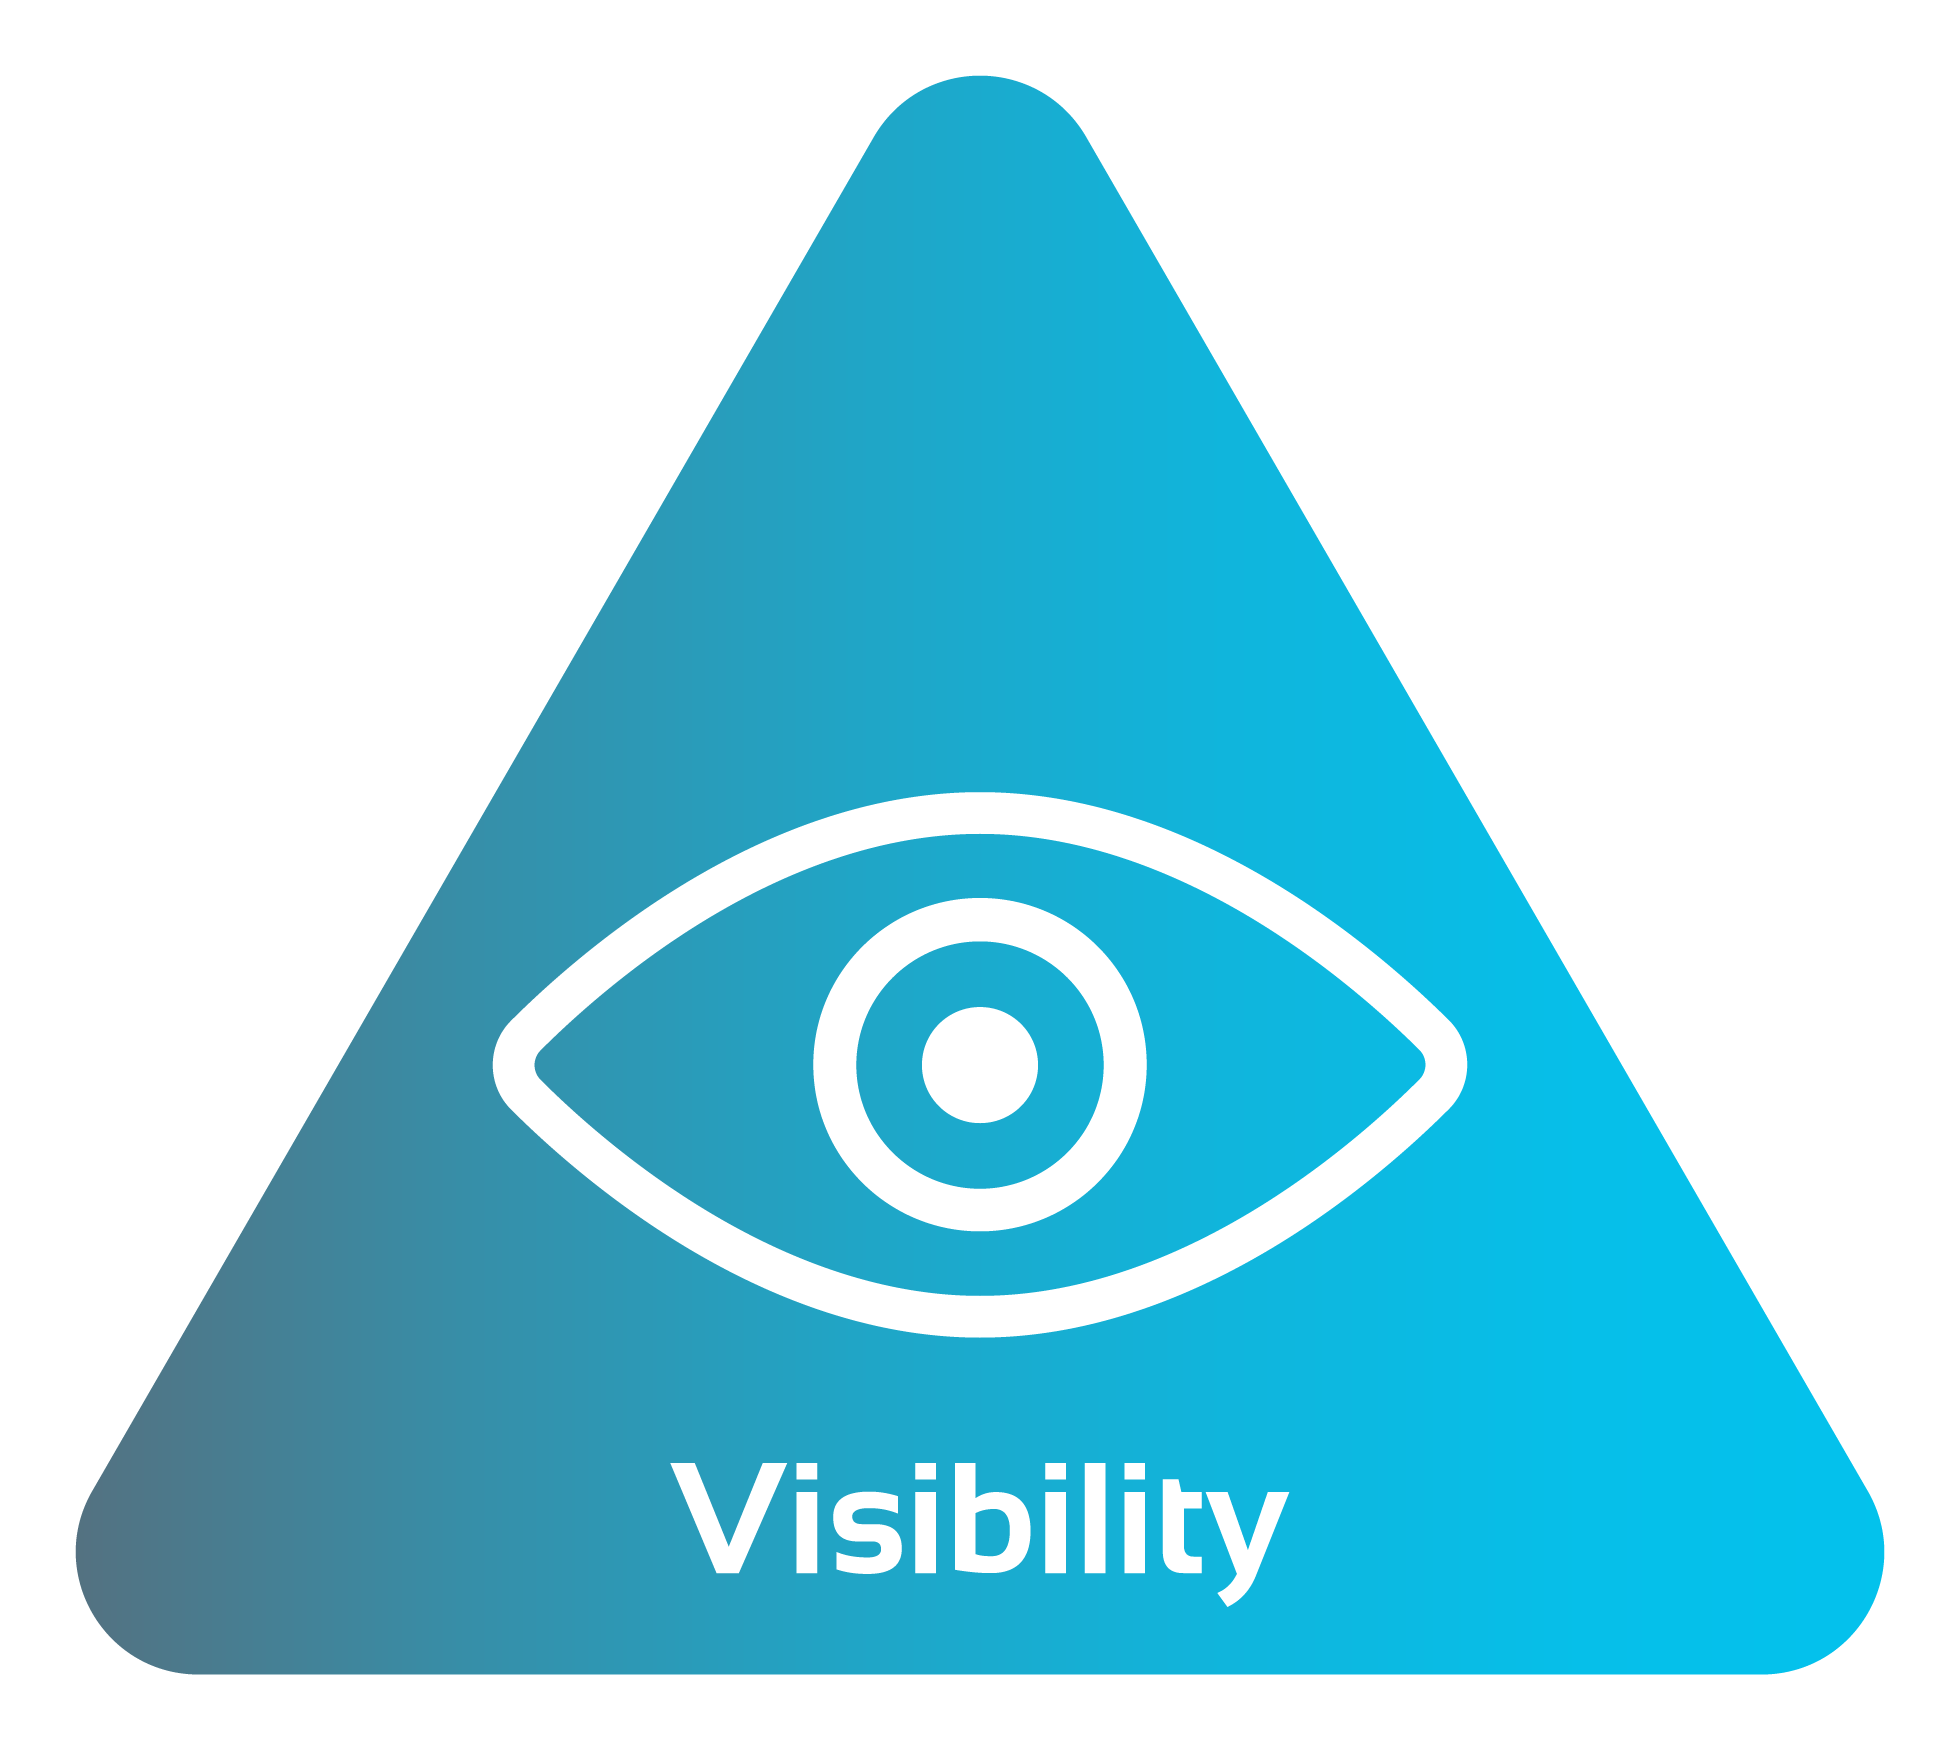 Visibility triangle